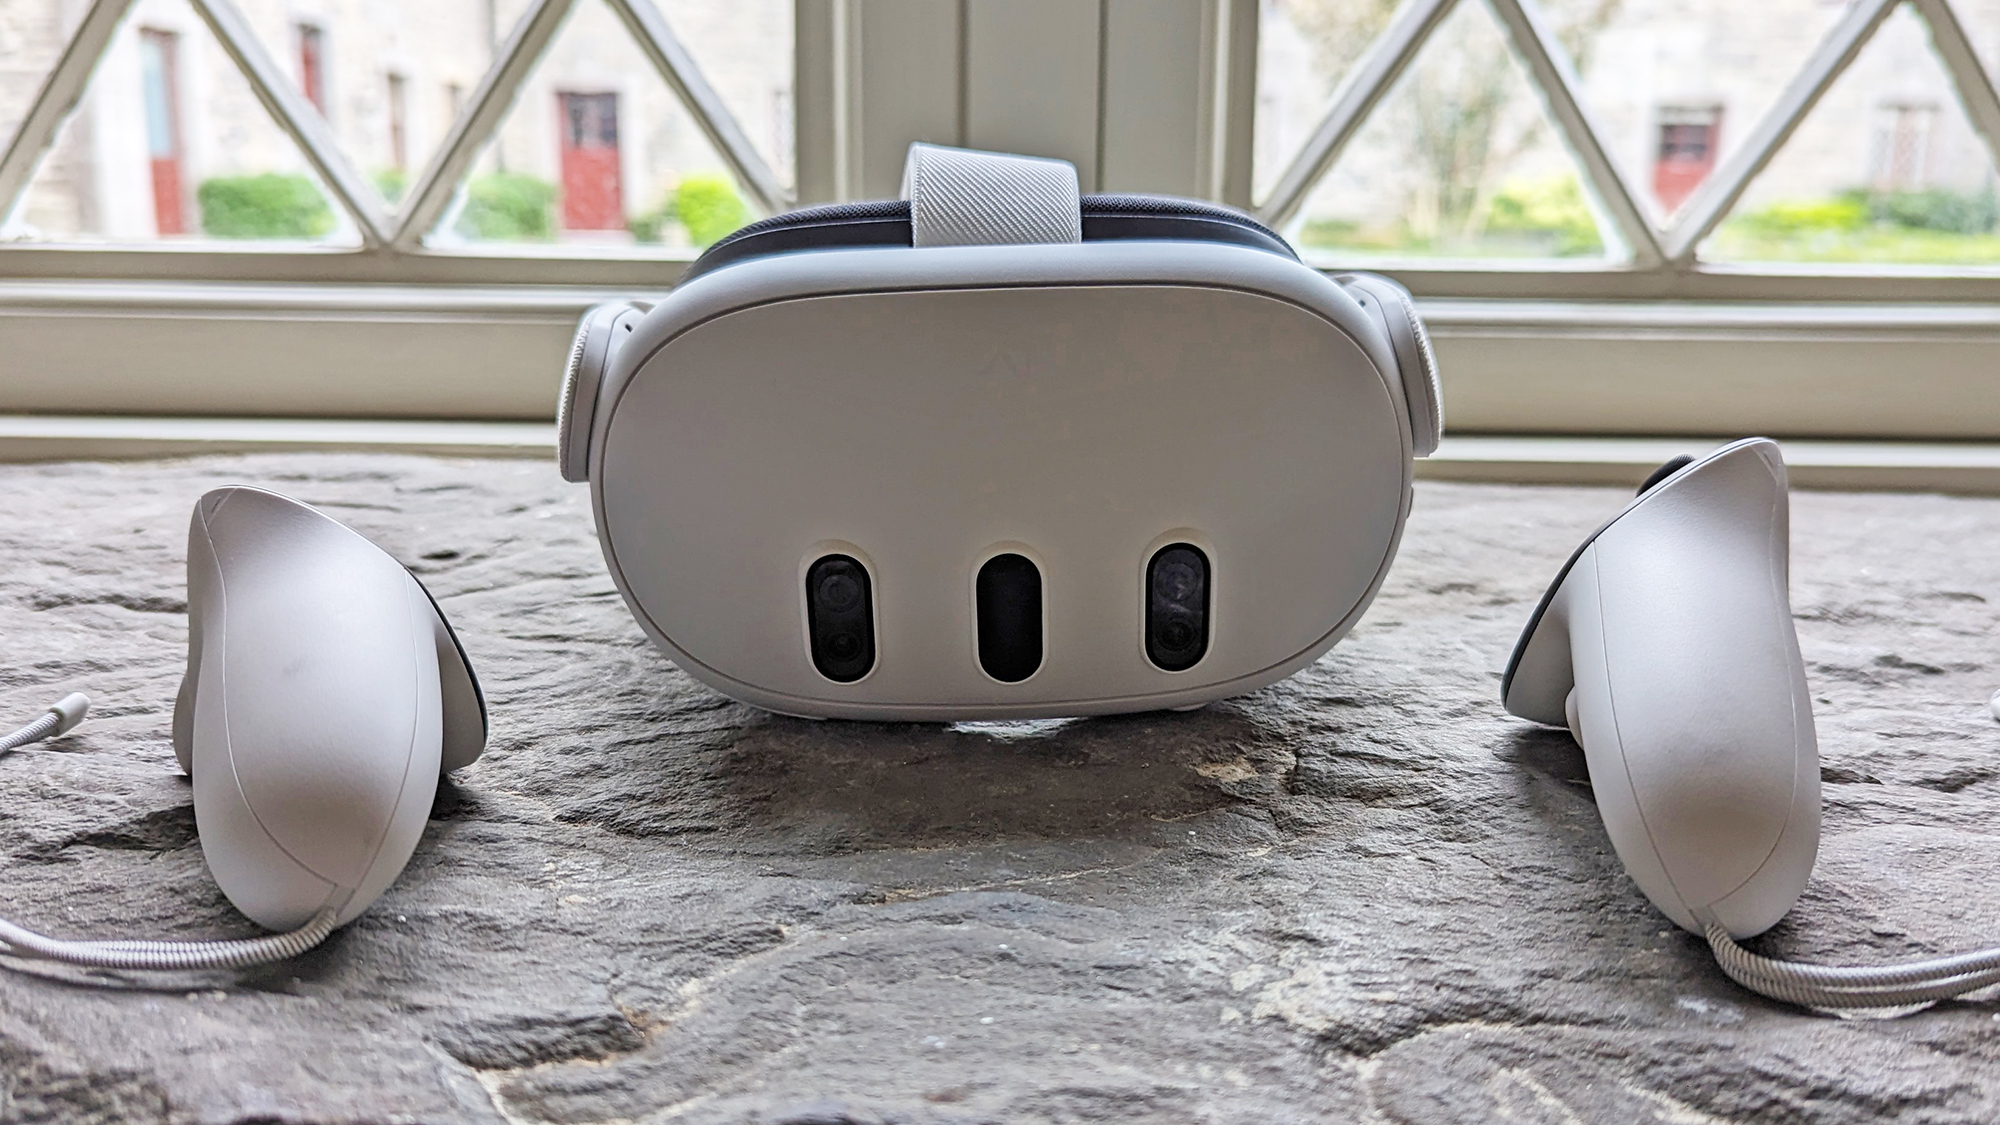 Meta Quest 2 review: The affordable VR headset we've been waiting for